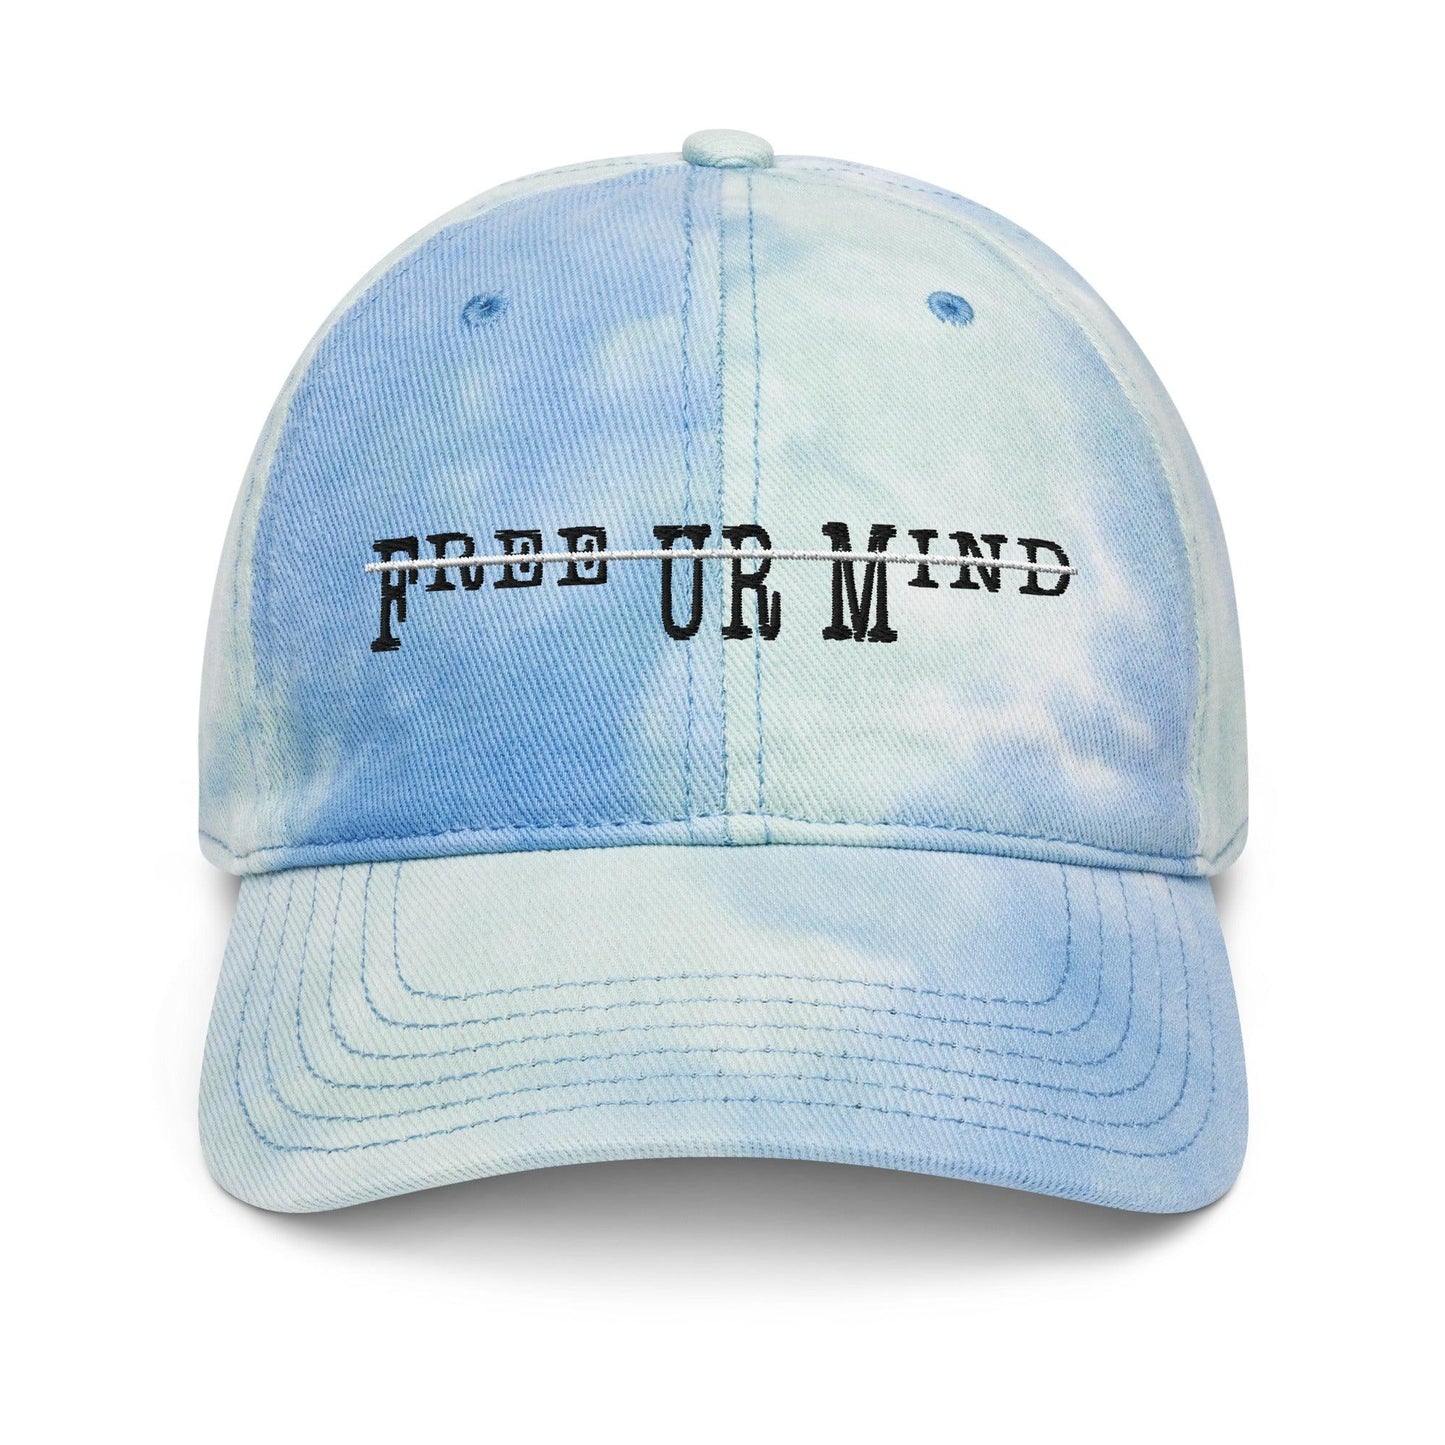 Graphic Tie dye hat - Kreative Passions